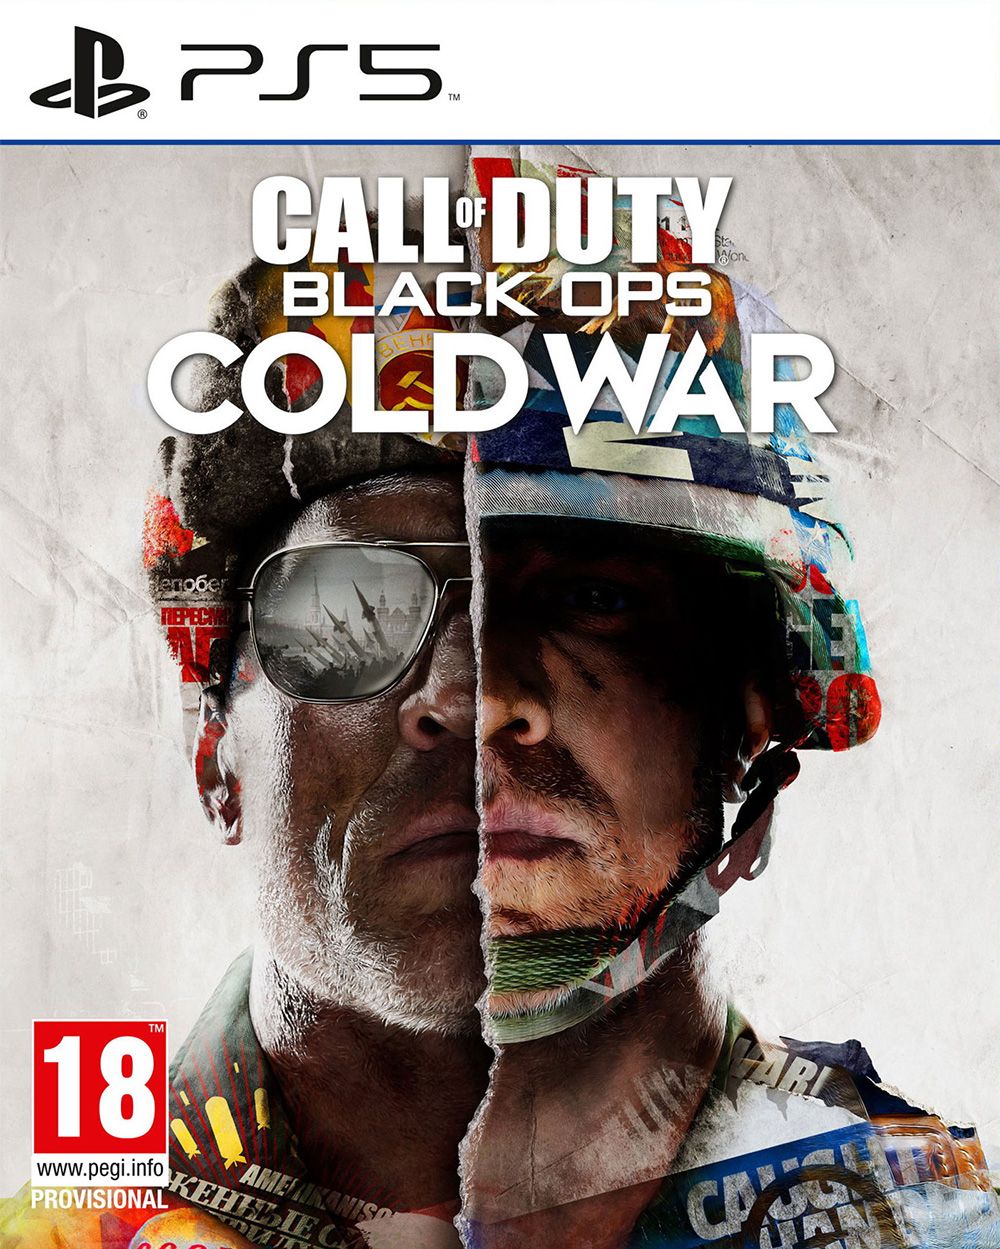 do you need internet to play call of duty black ops cold war